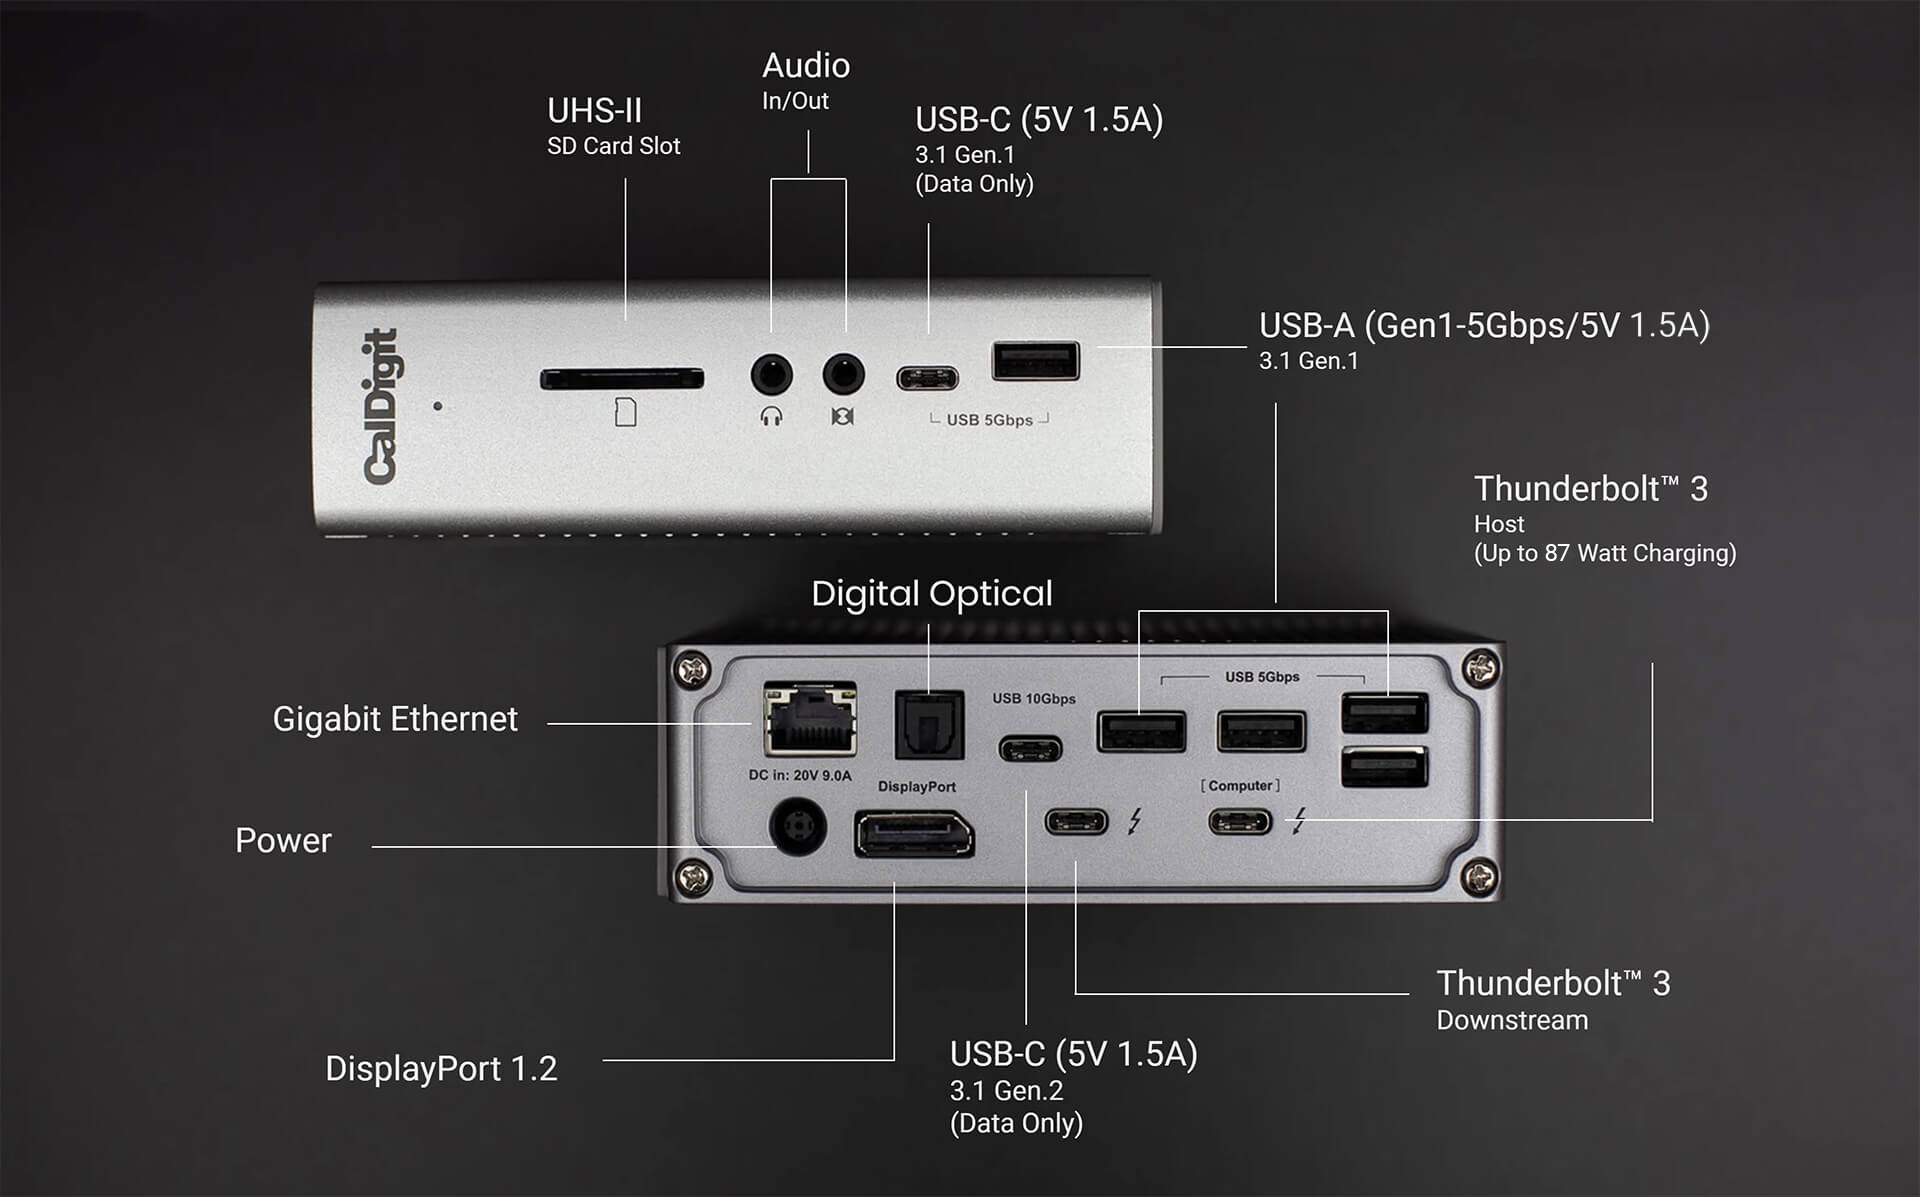 does my apple screen have to connect to mac mini using usb port for audio?